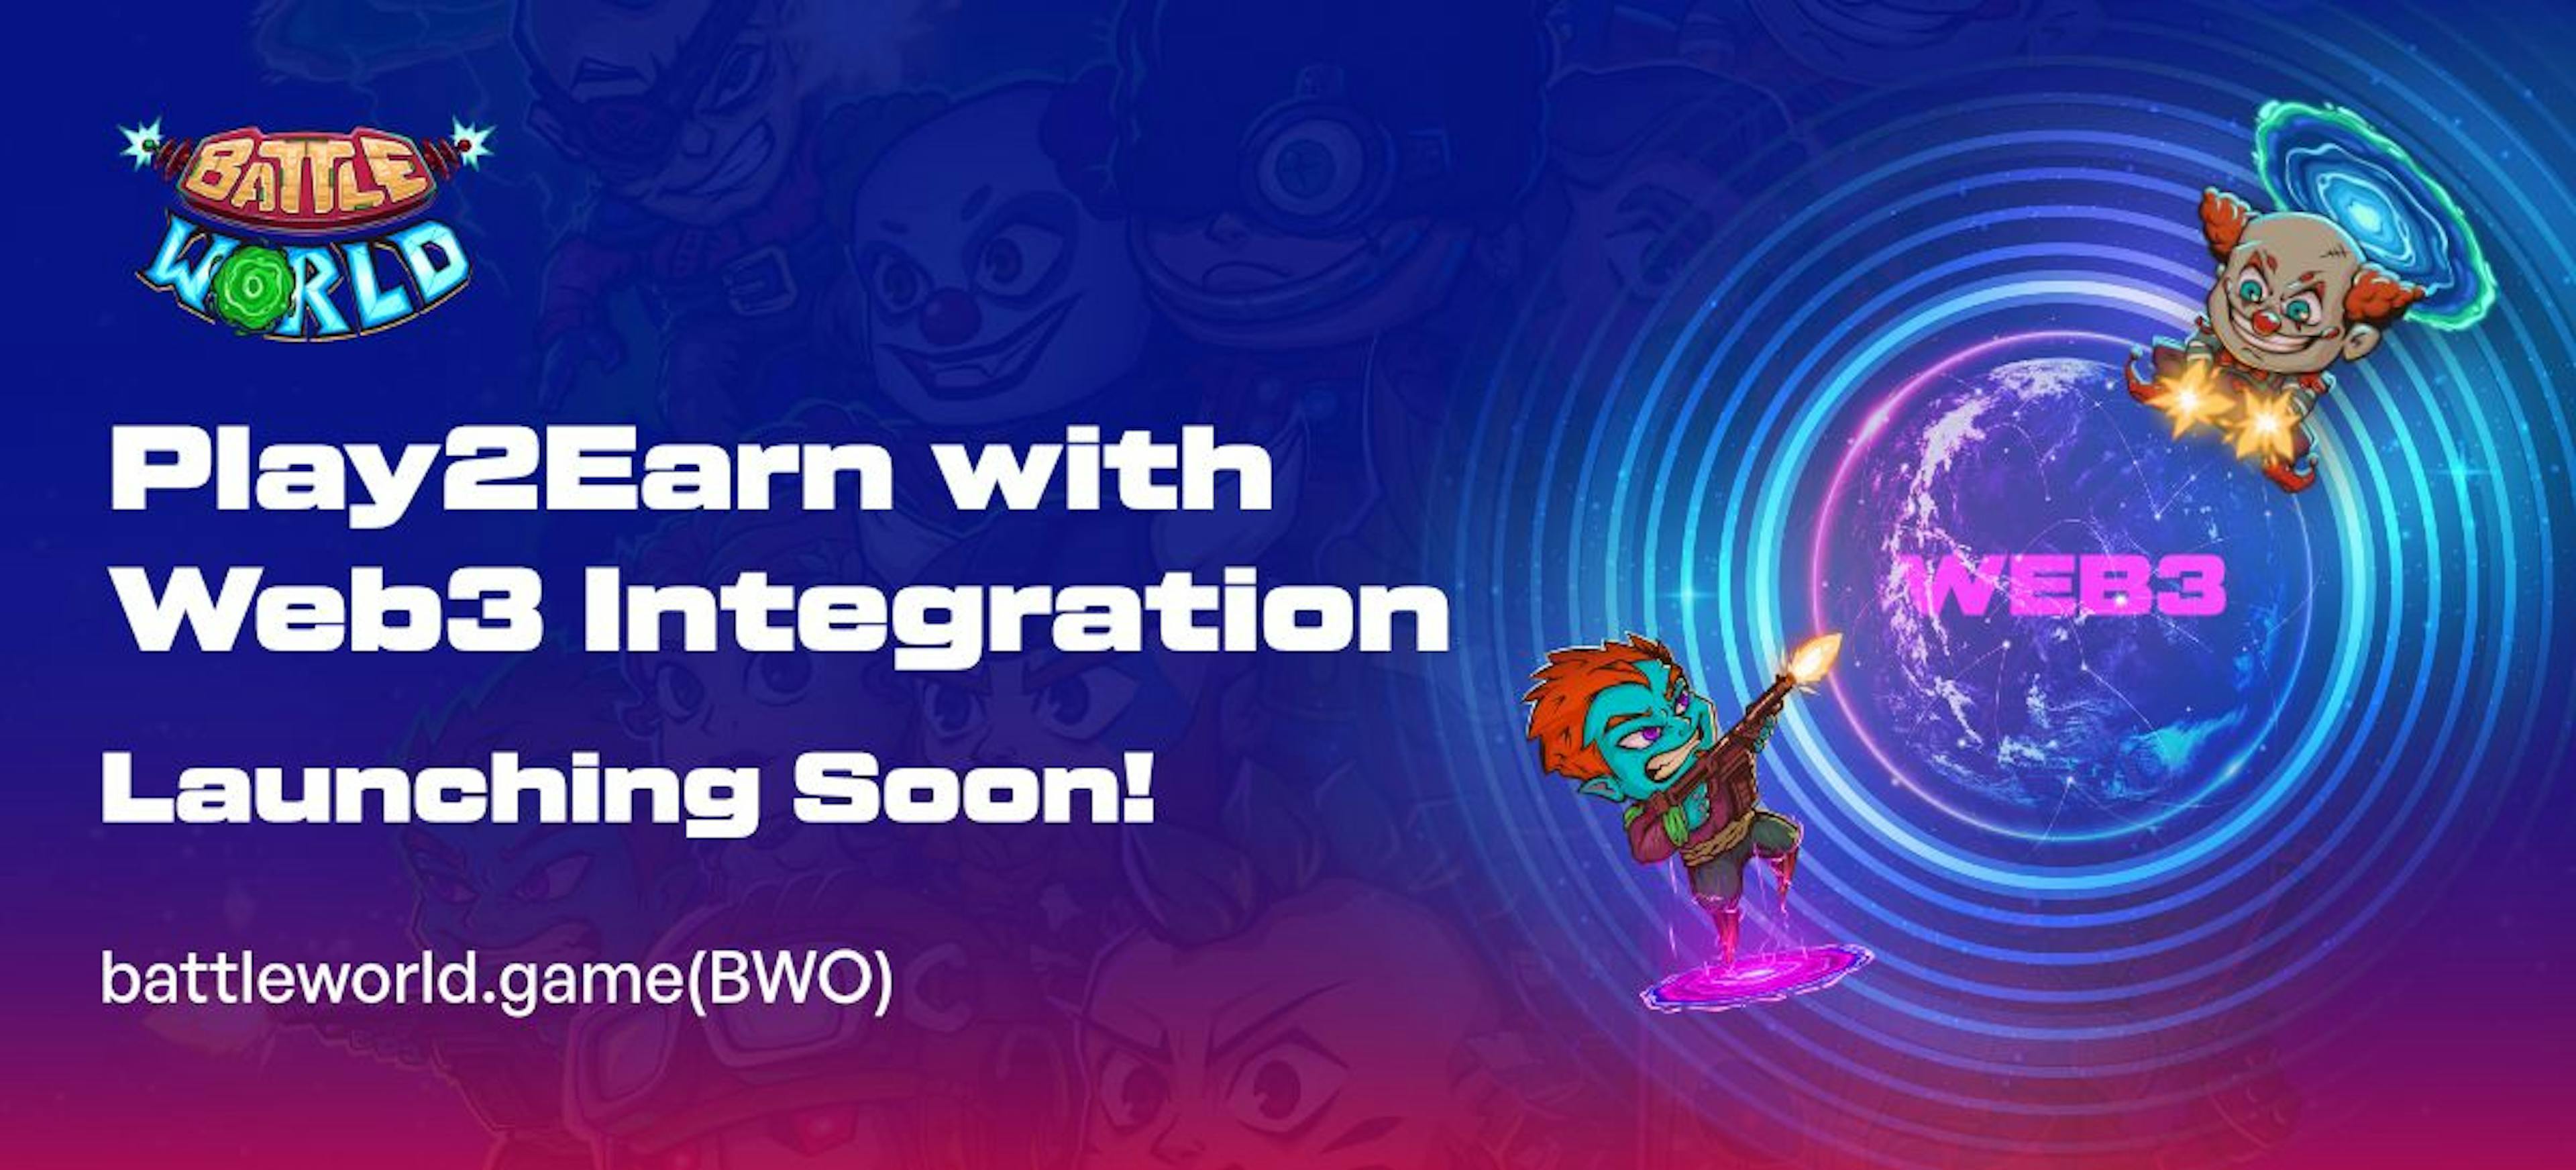 featured image - Battle World Game: Play2Earn with Web3 Integration - Launching Soon!